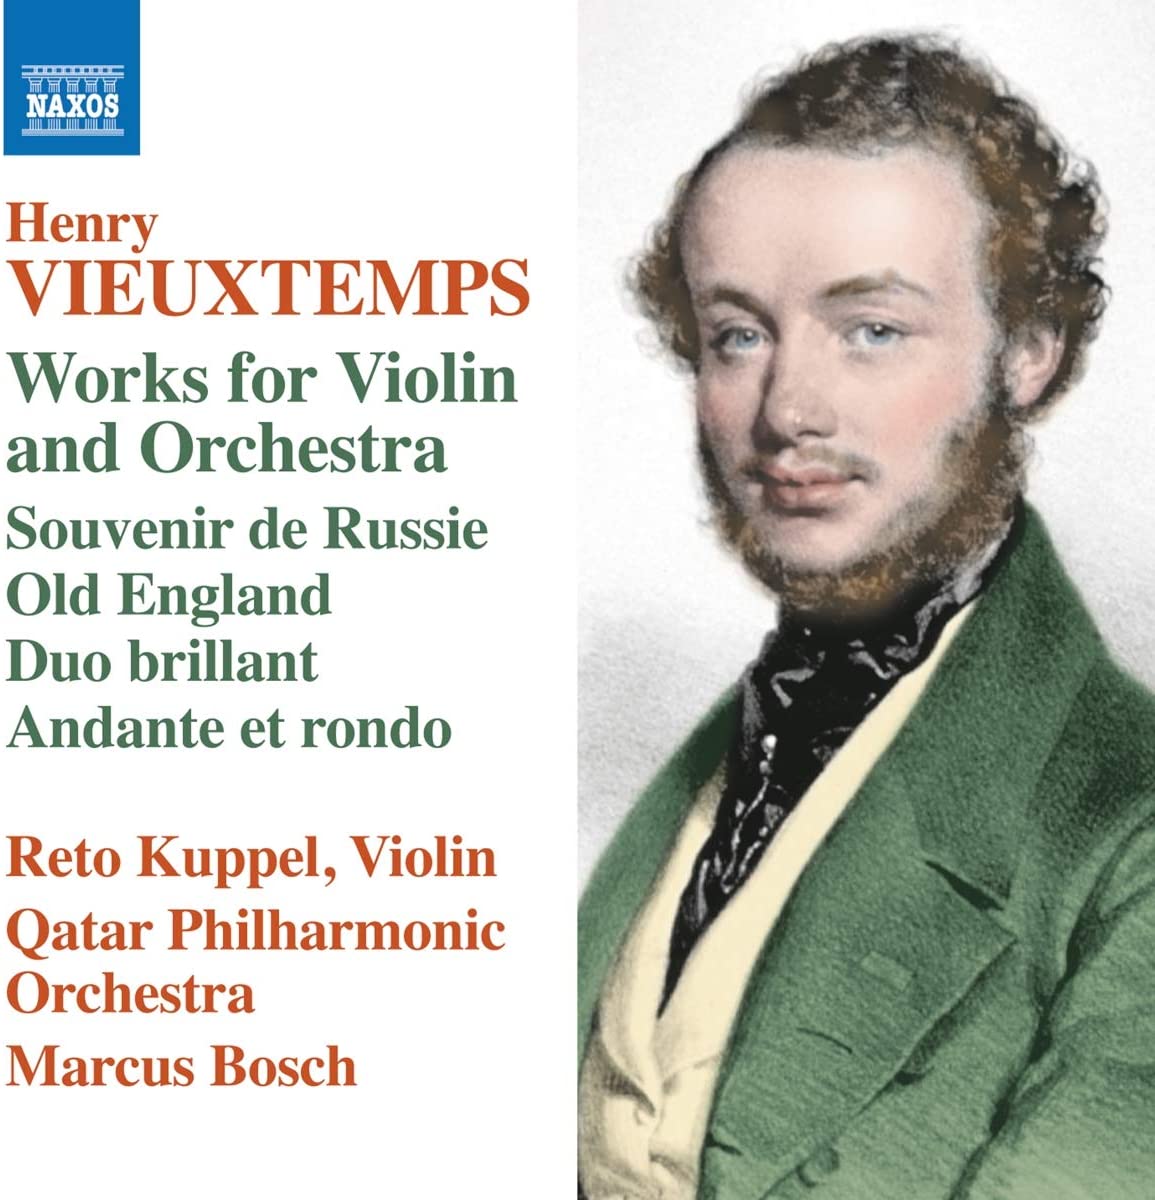 Review of VIEUXTEMPS Works for Violin & Orchestra (Reto Kuppel)